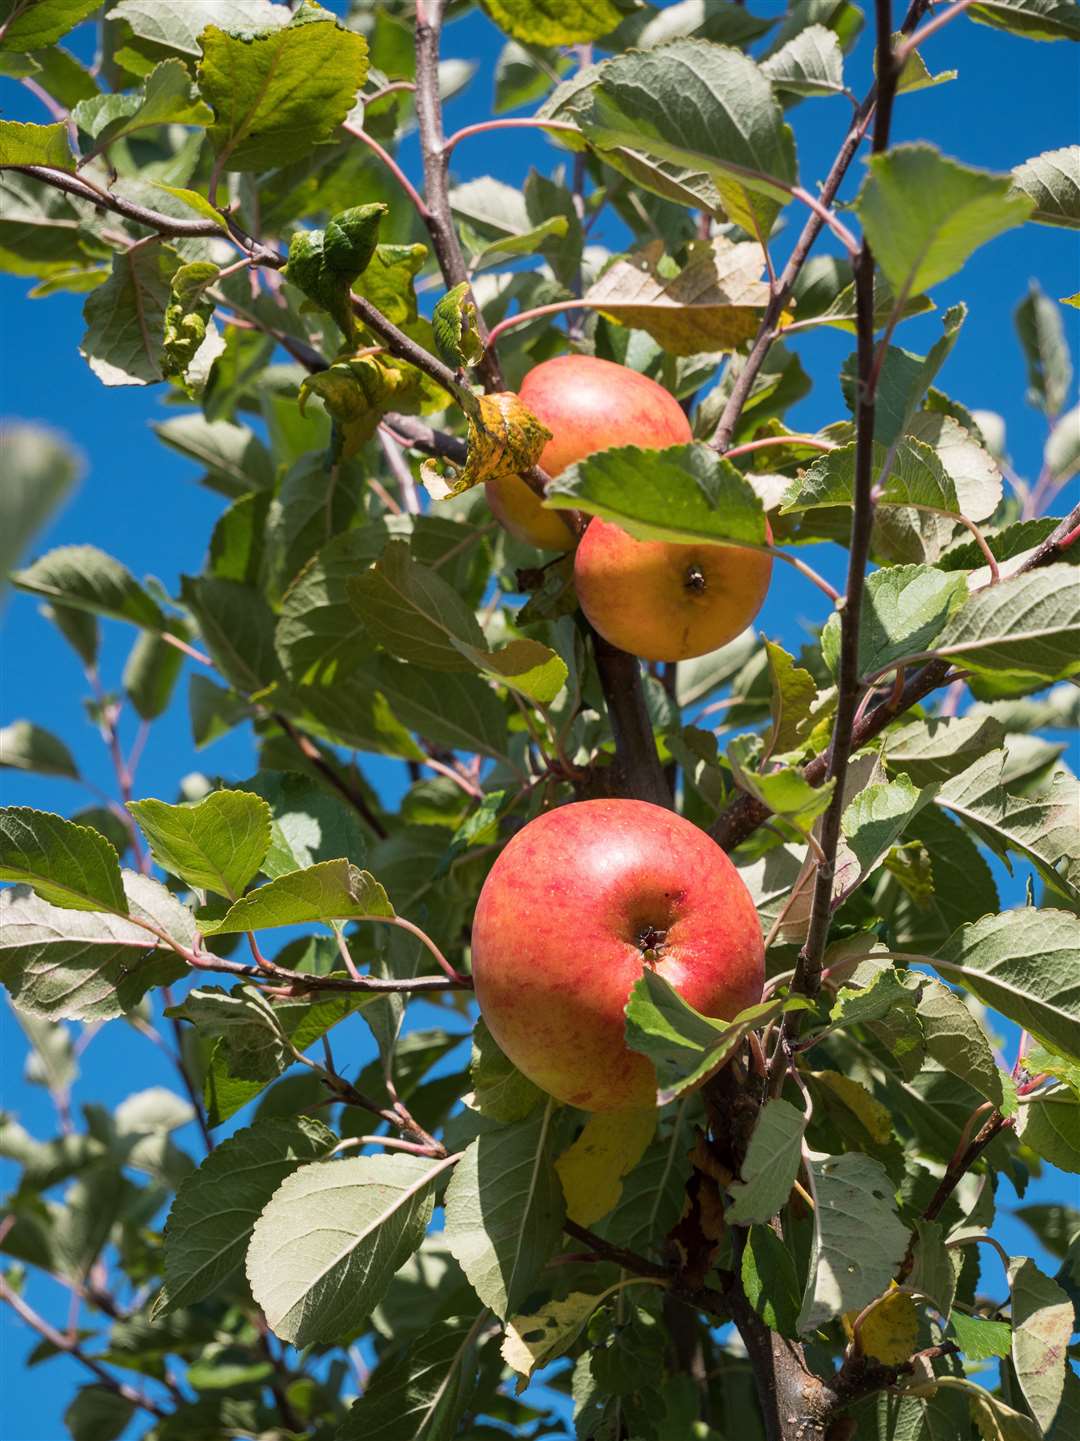 Apples in the orchard at Sissinghurst Castle Garden Picture: National Trust Images